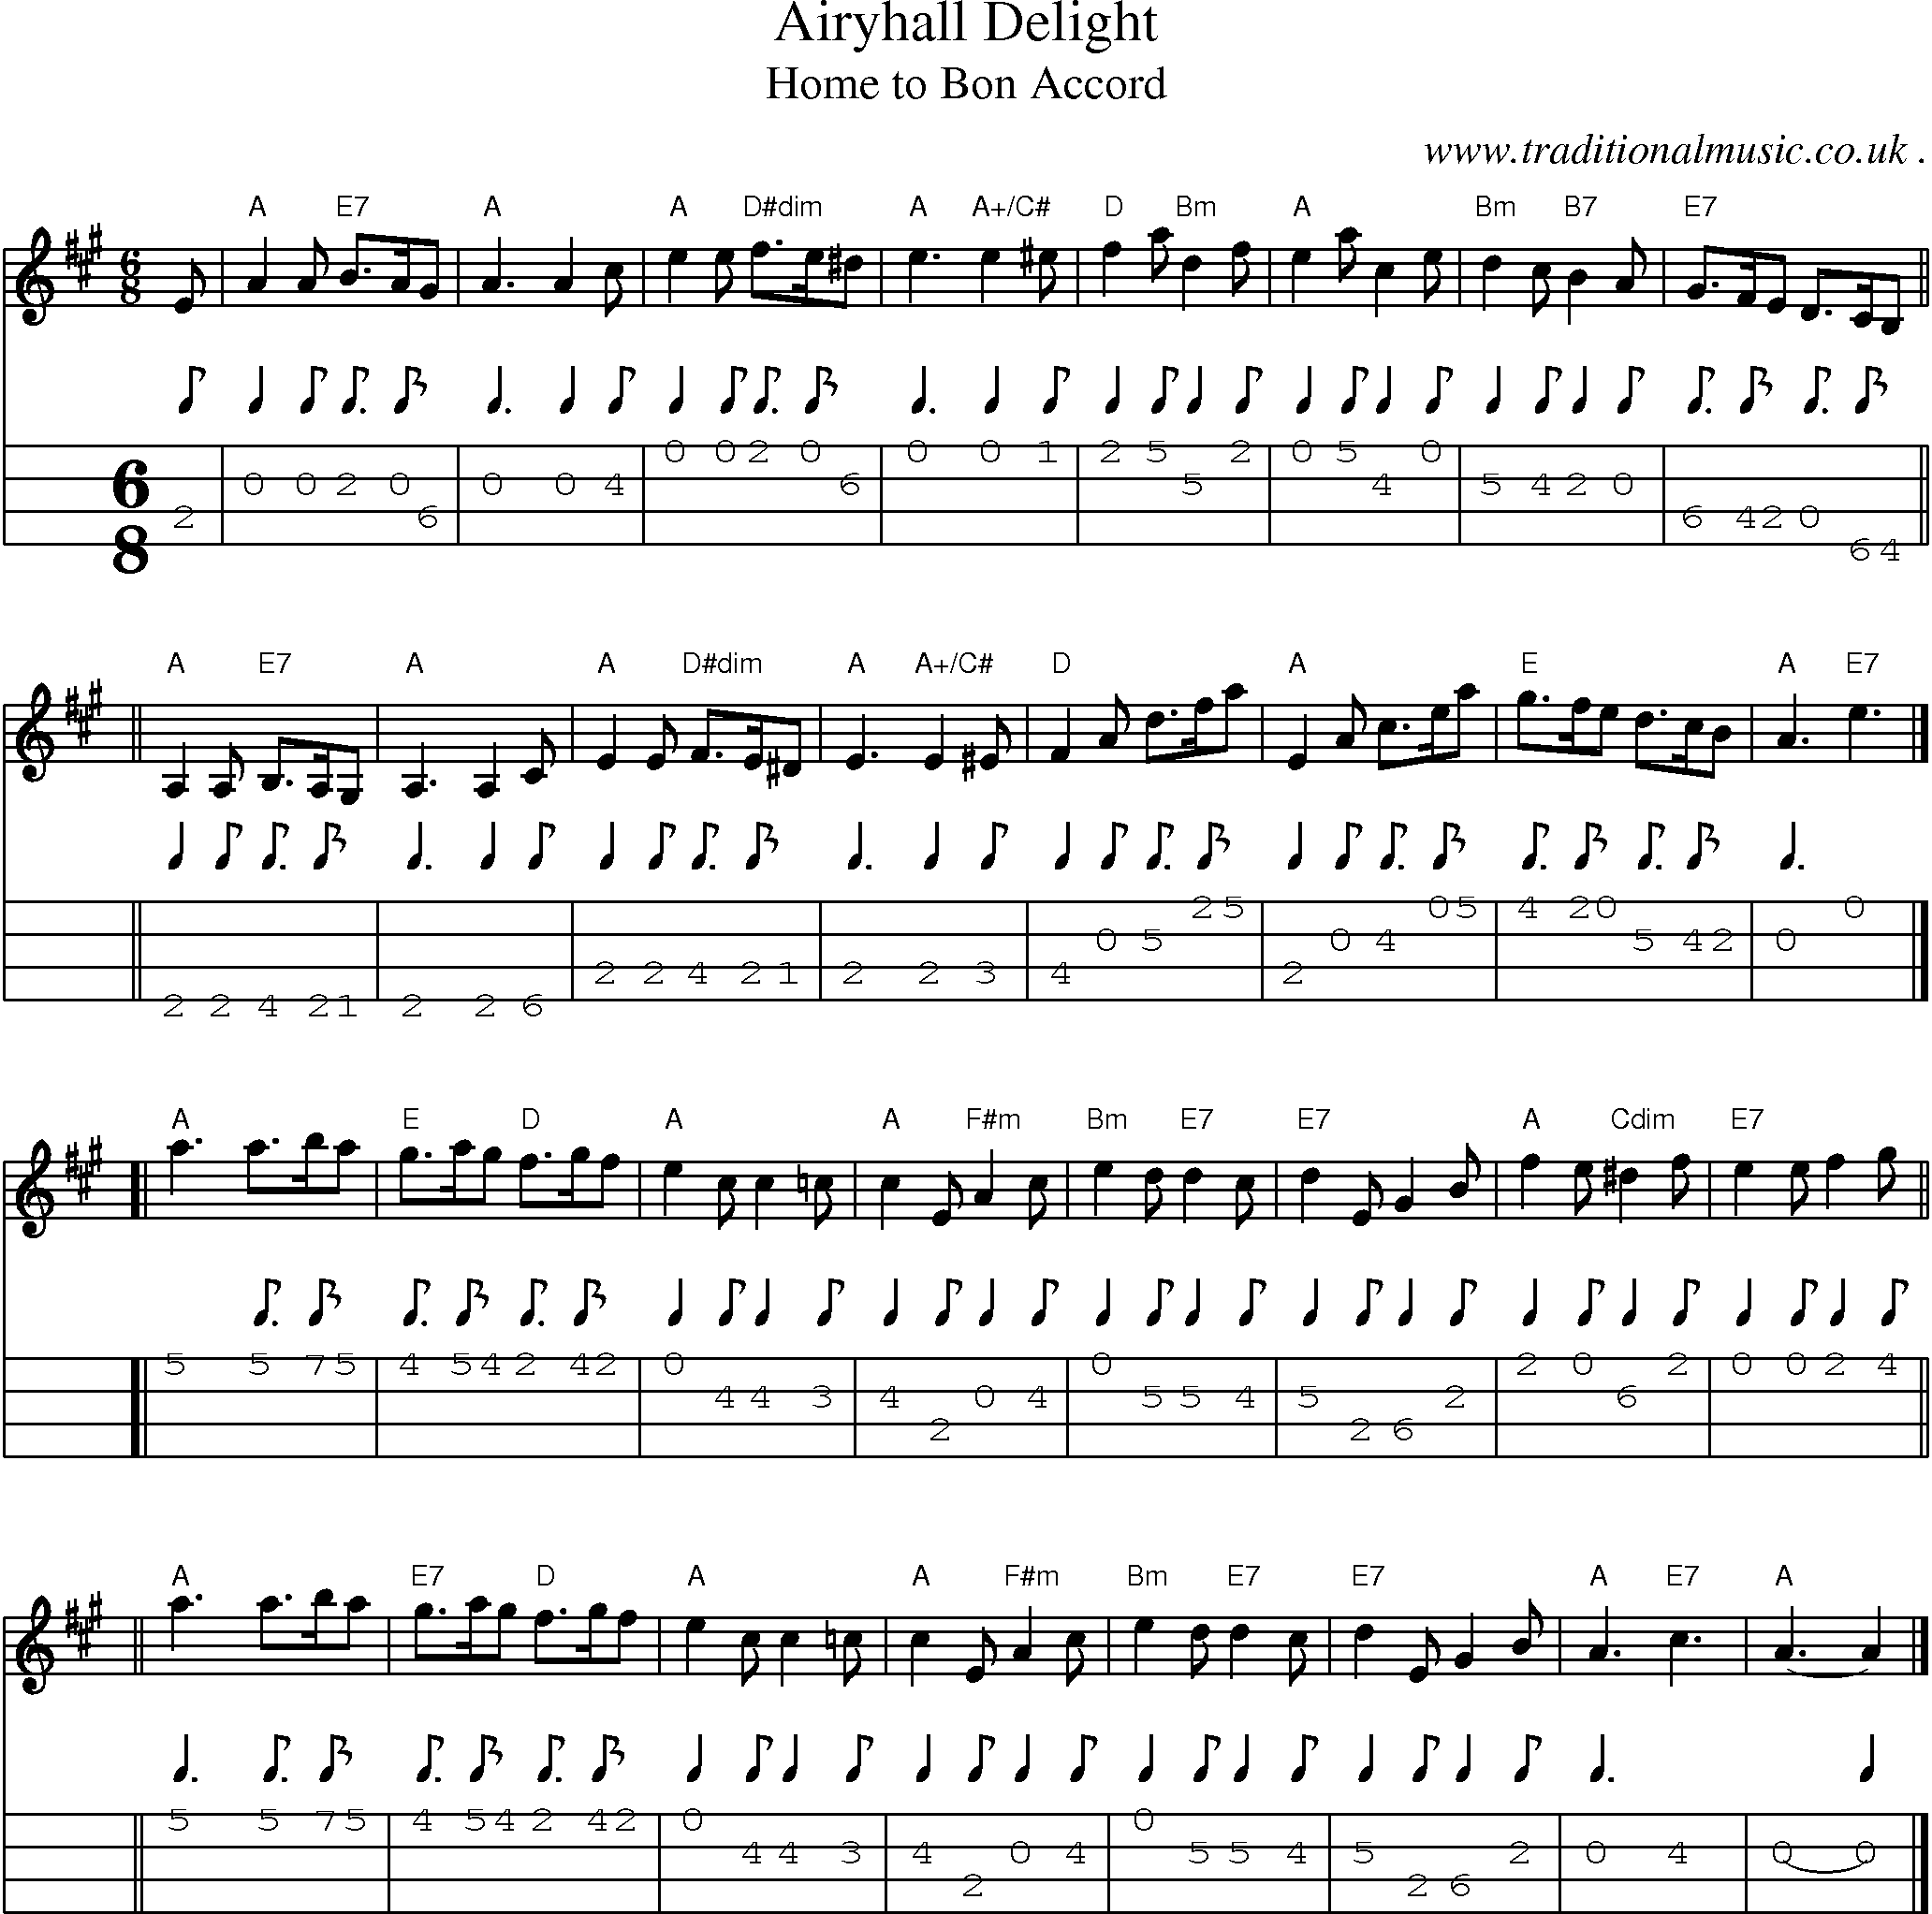 Sheet-music  score, Chords and Mandolin Tabs for Airyhall Delight